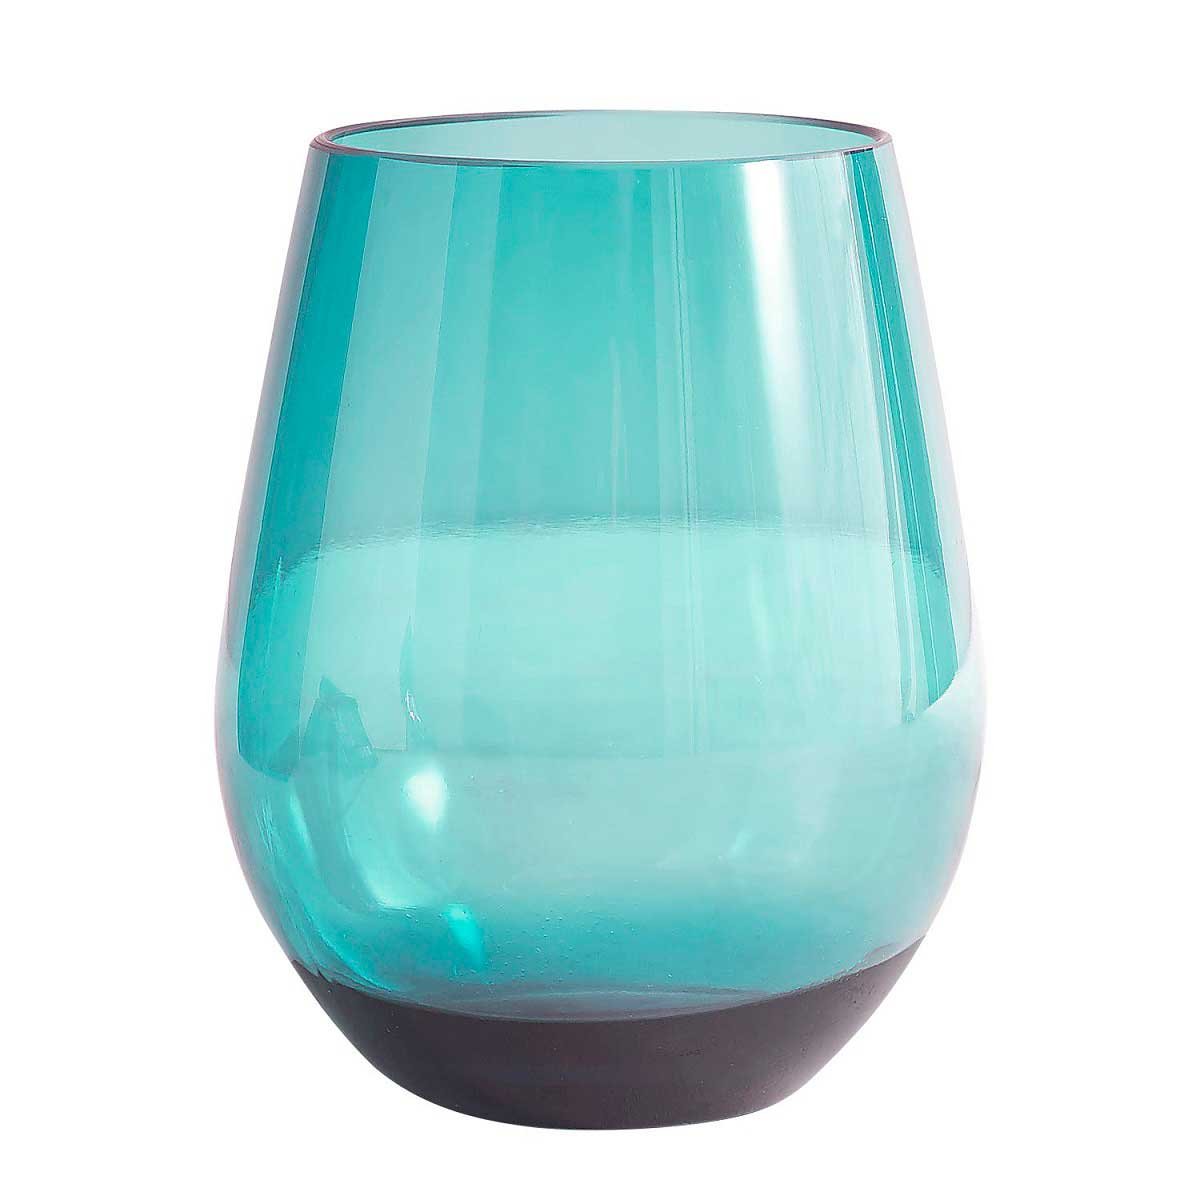 Copa Sin Tallo Clarity Turquoise Pier 1 Imports